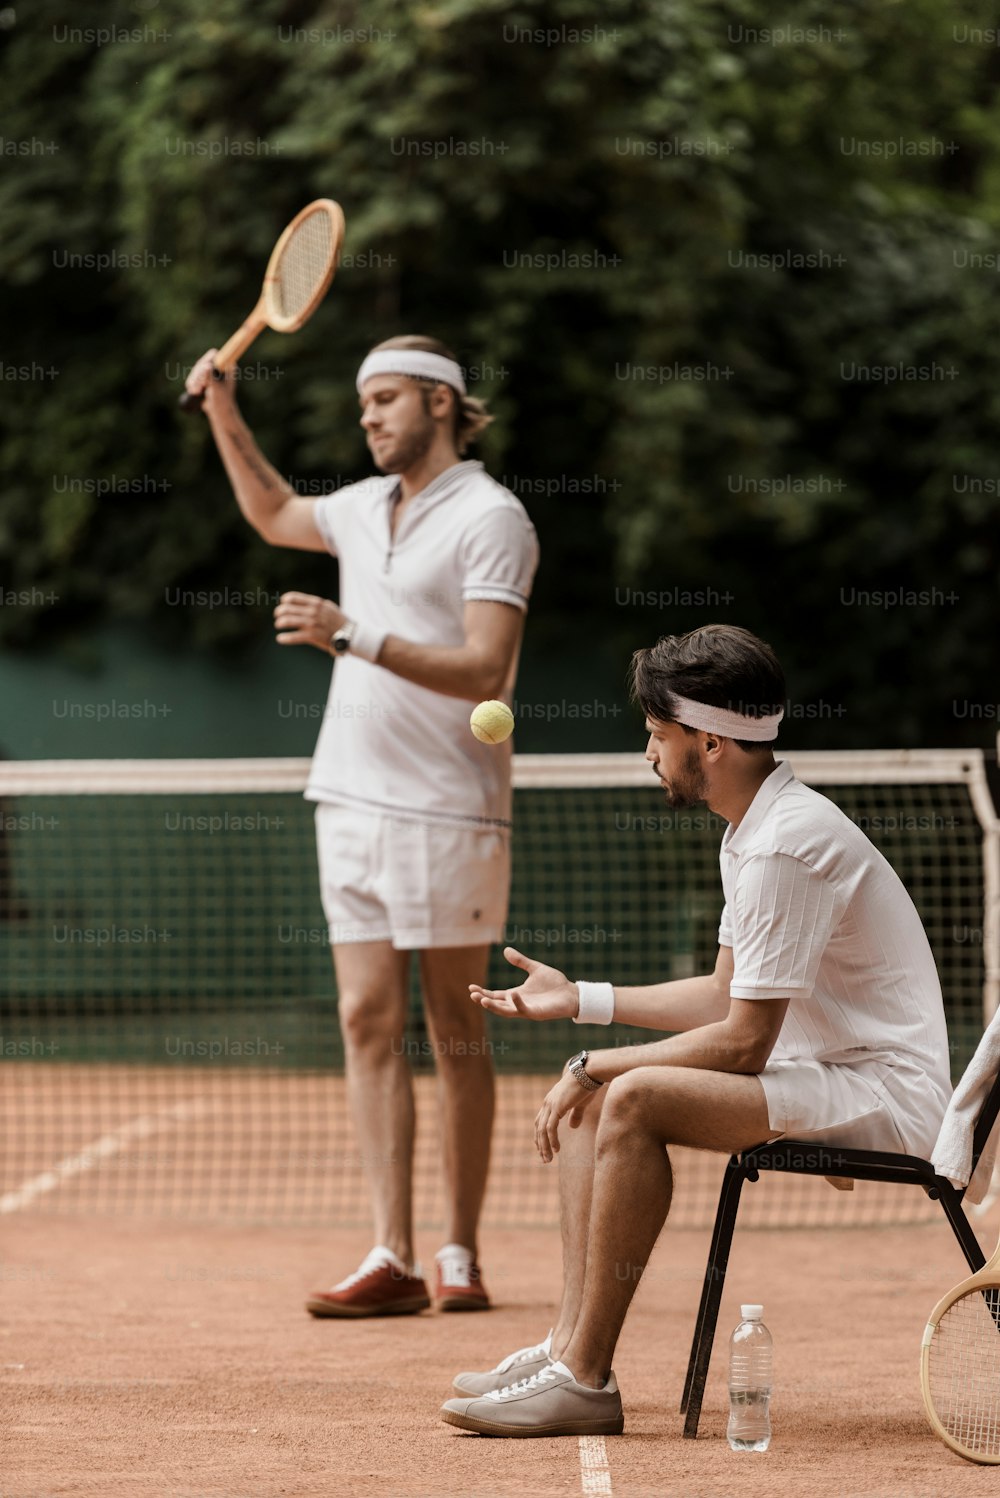 retro styled tennis players preparing for game at tennis court